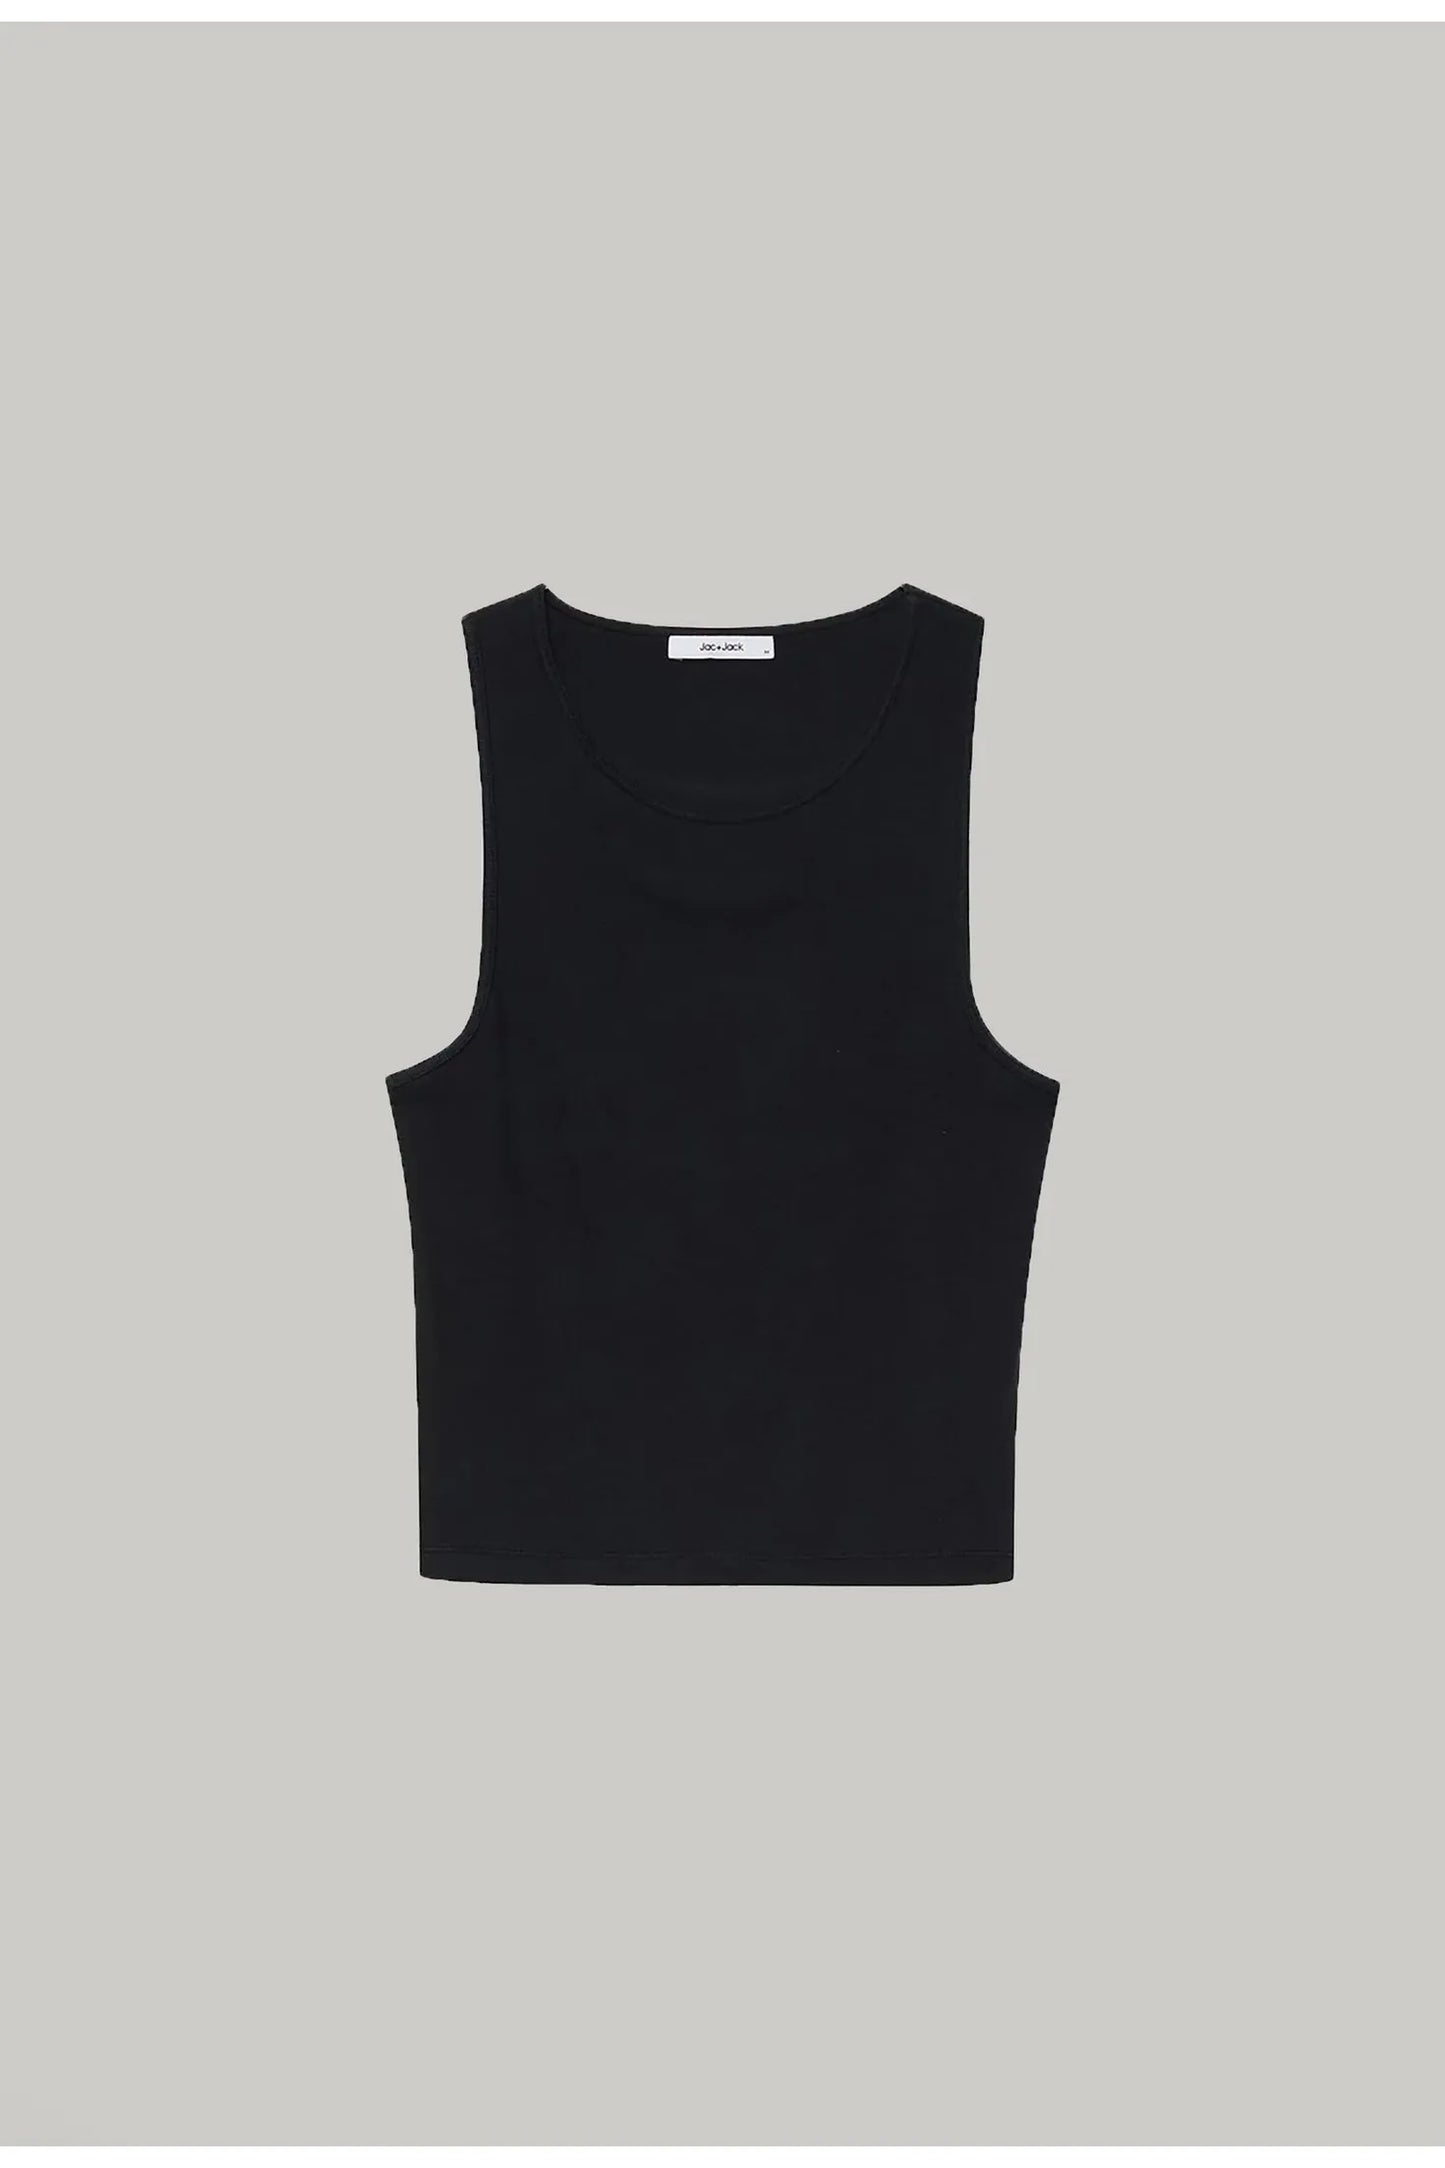 Poem Ribbed Cotton Tank in Black by Jac + Jack